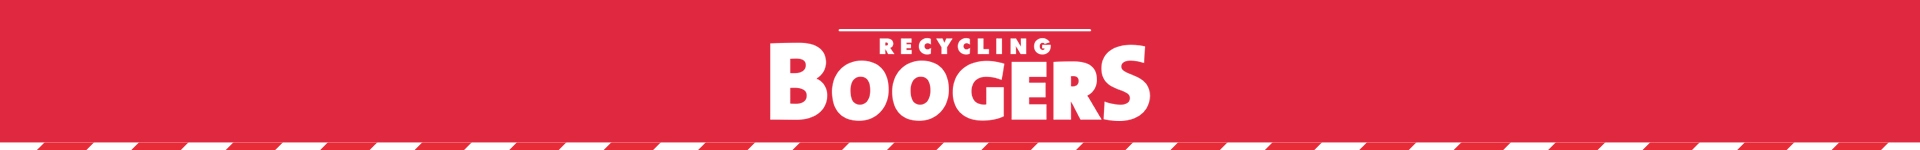 Boogersrecycling.nls achtergrond